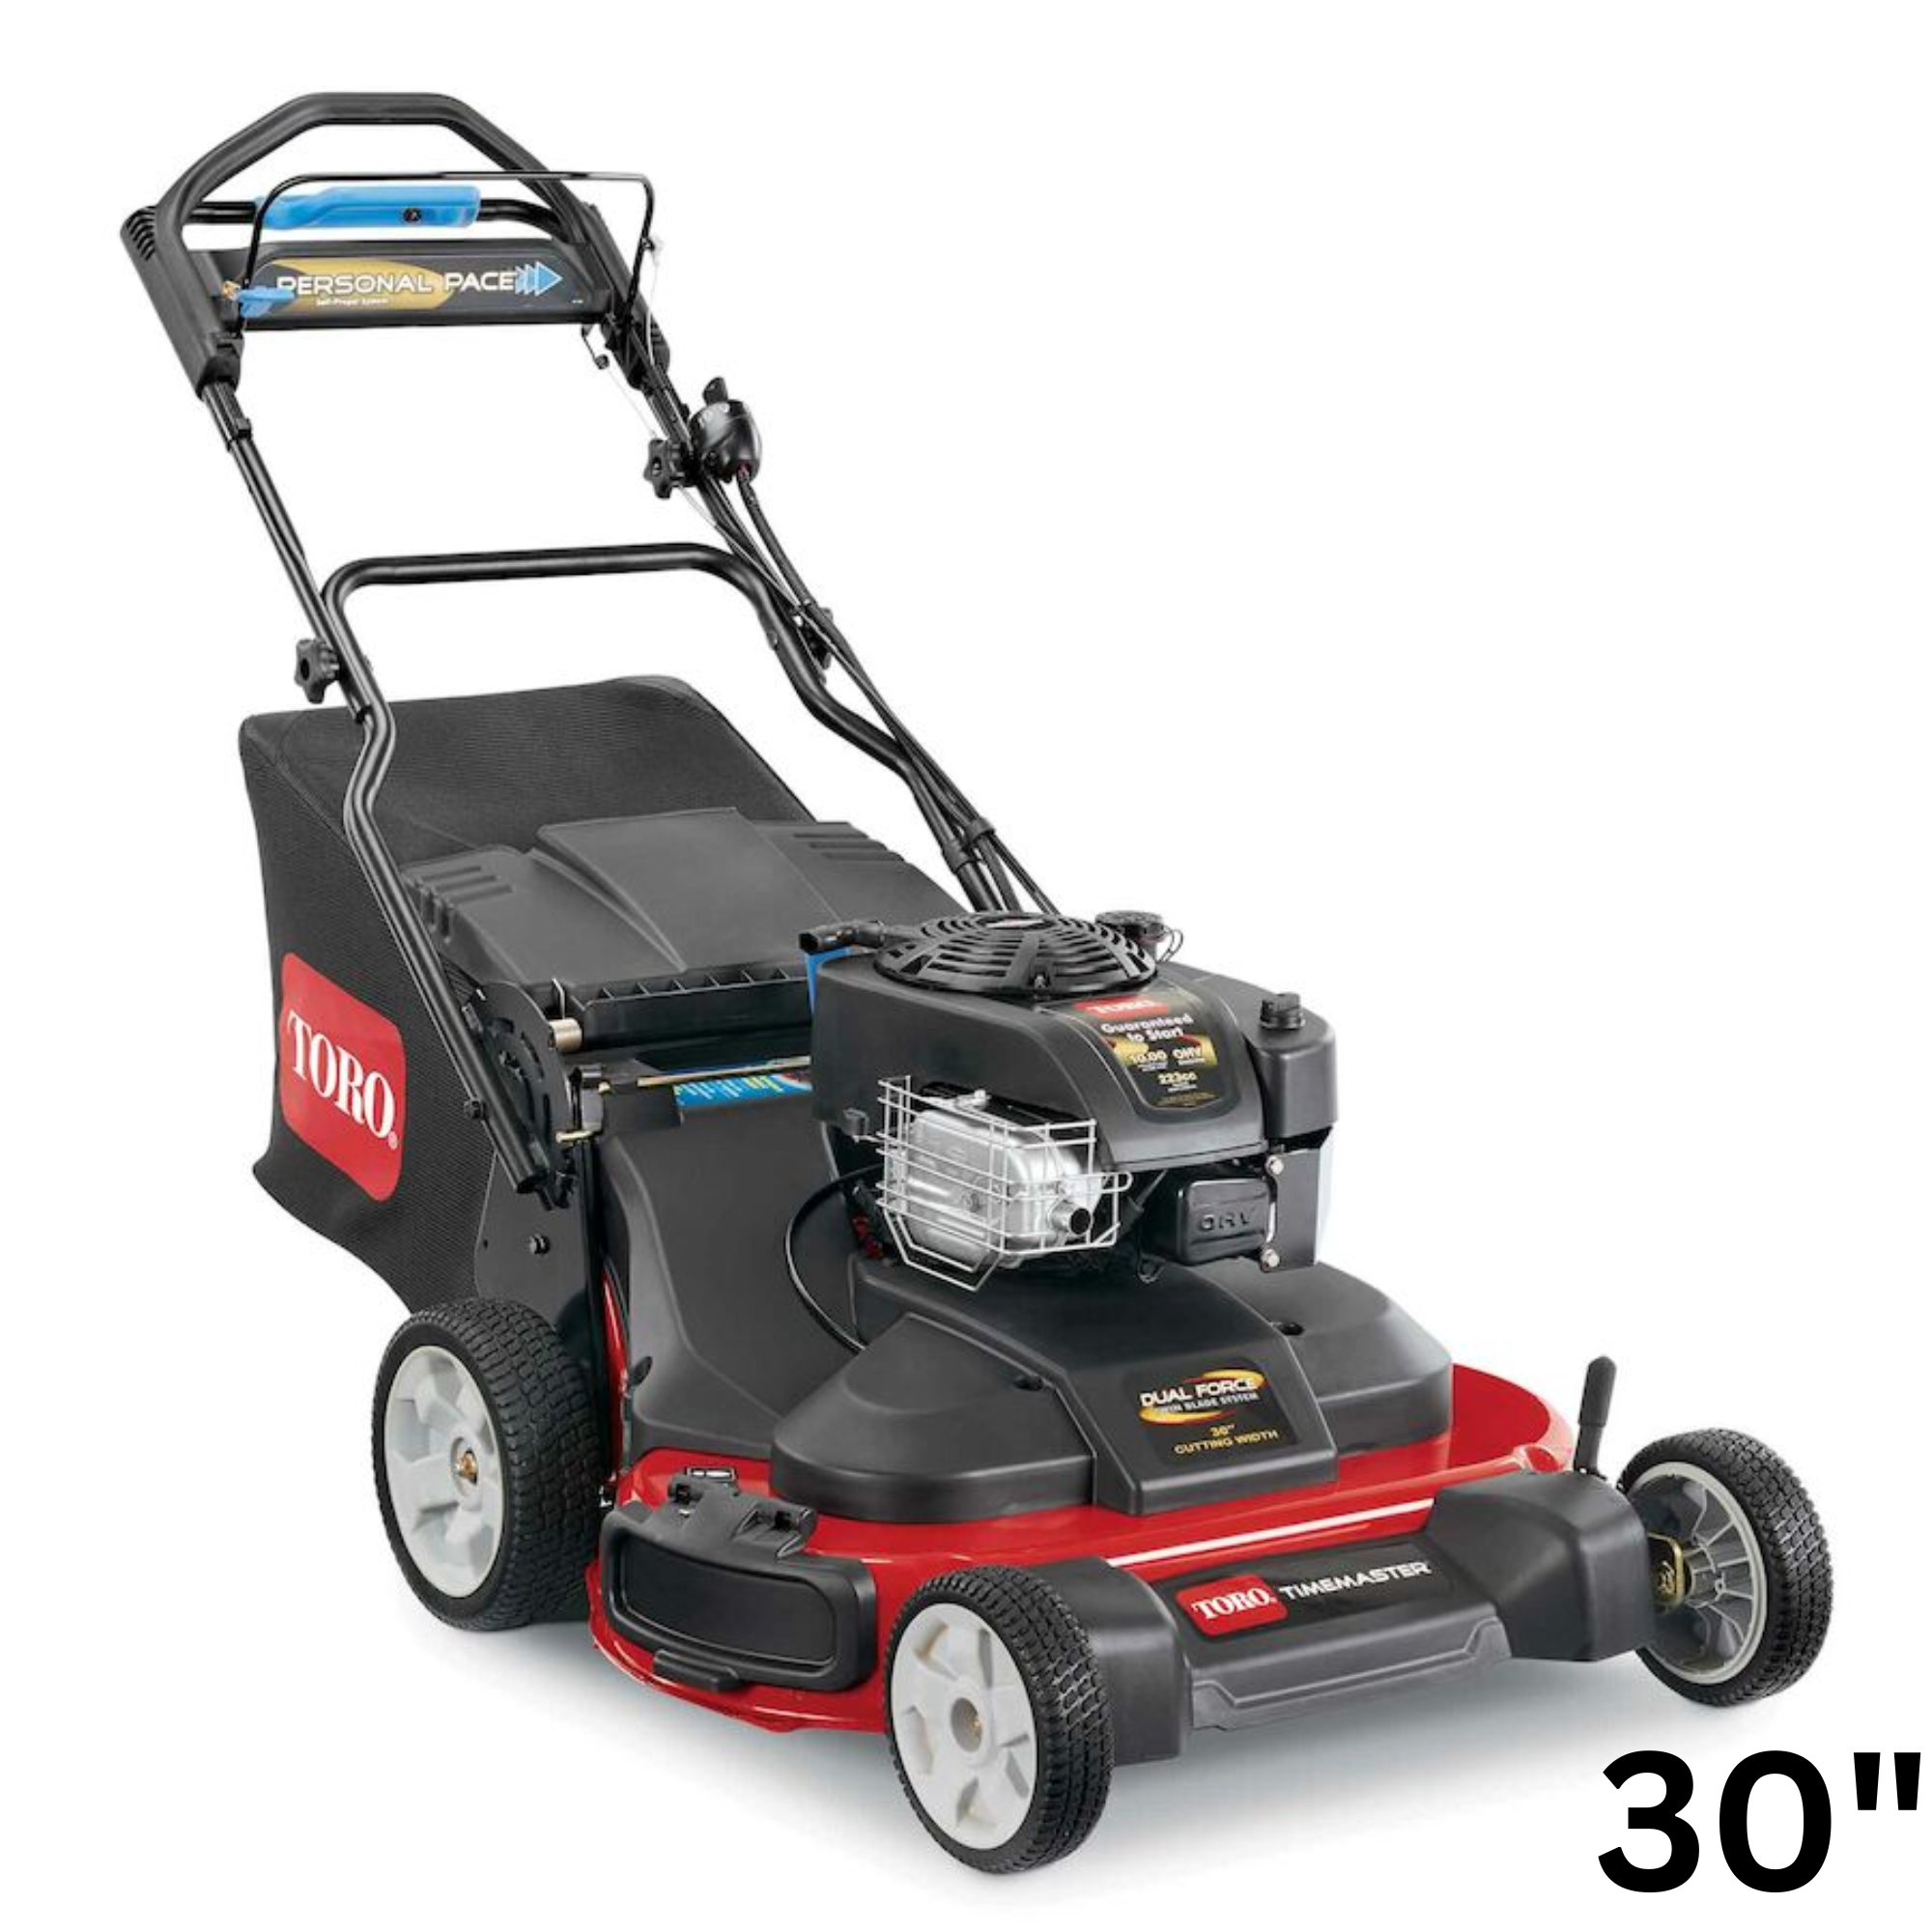 Toro TimeMaster 30" Deck Electric Start w/Personal Pace Gas Lawn Mower